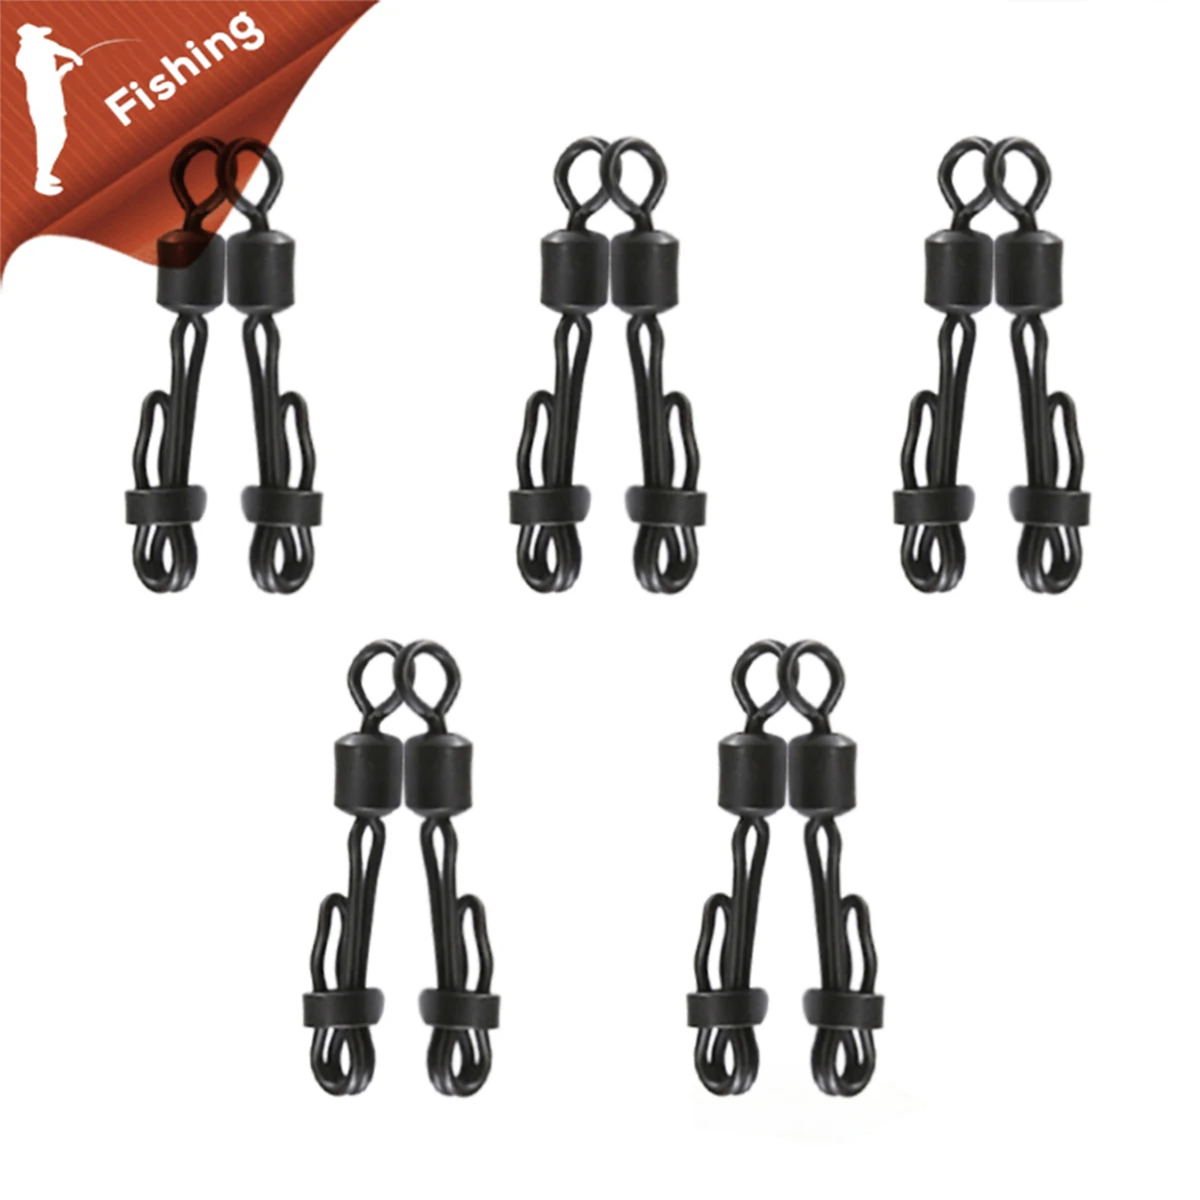 

10pcs/20pcs Carp Fishing Accessories Quick Change Swivel with Clam Lock Clip Rolling Ring Connector Terminal Tackle